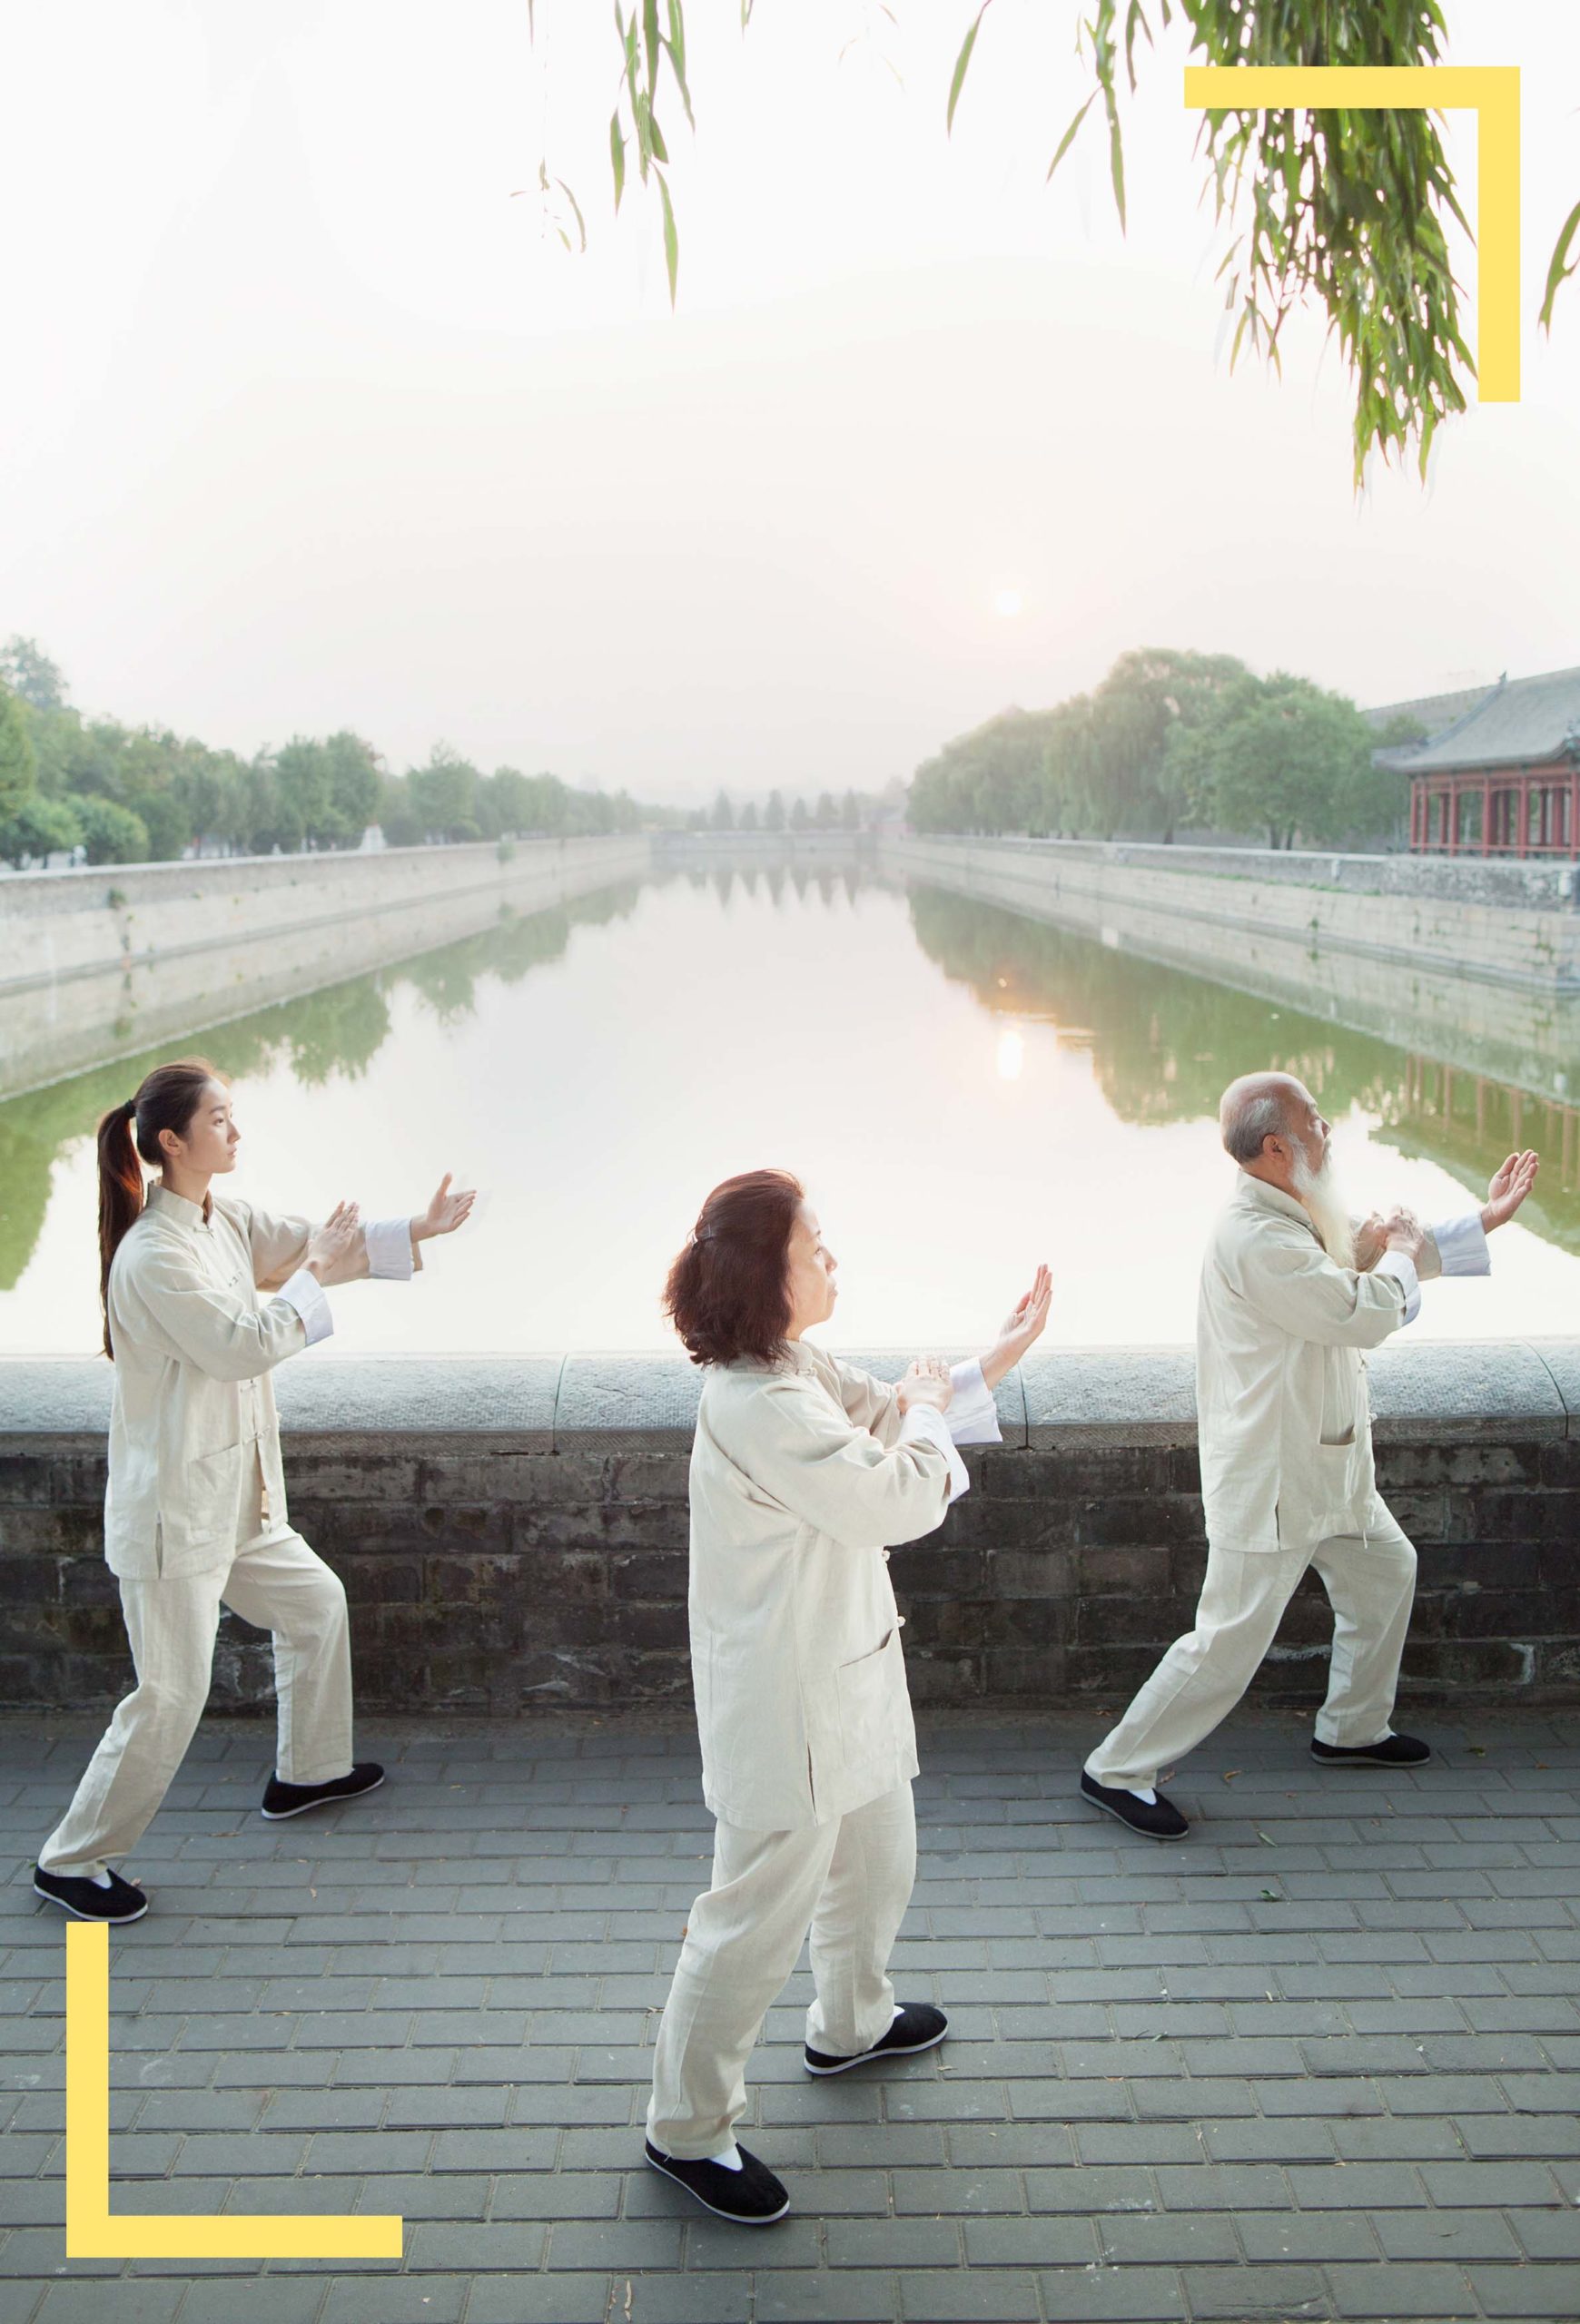 Outdoor Qigong Class with the students and instructor